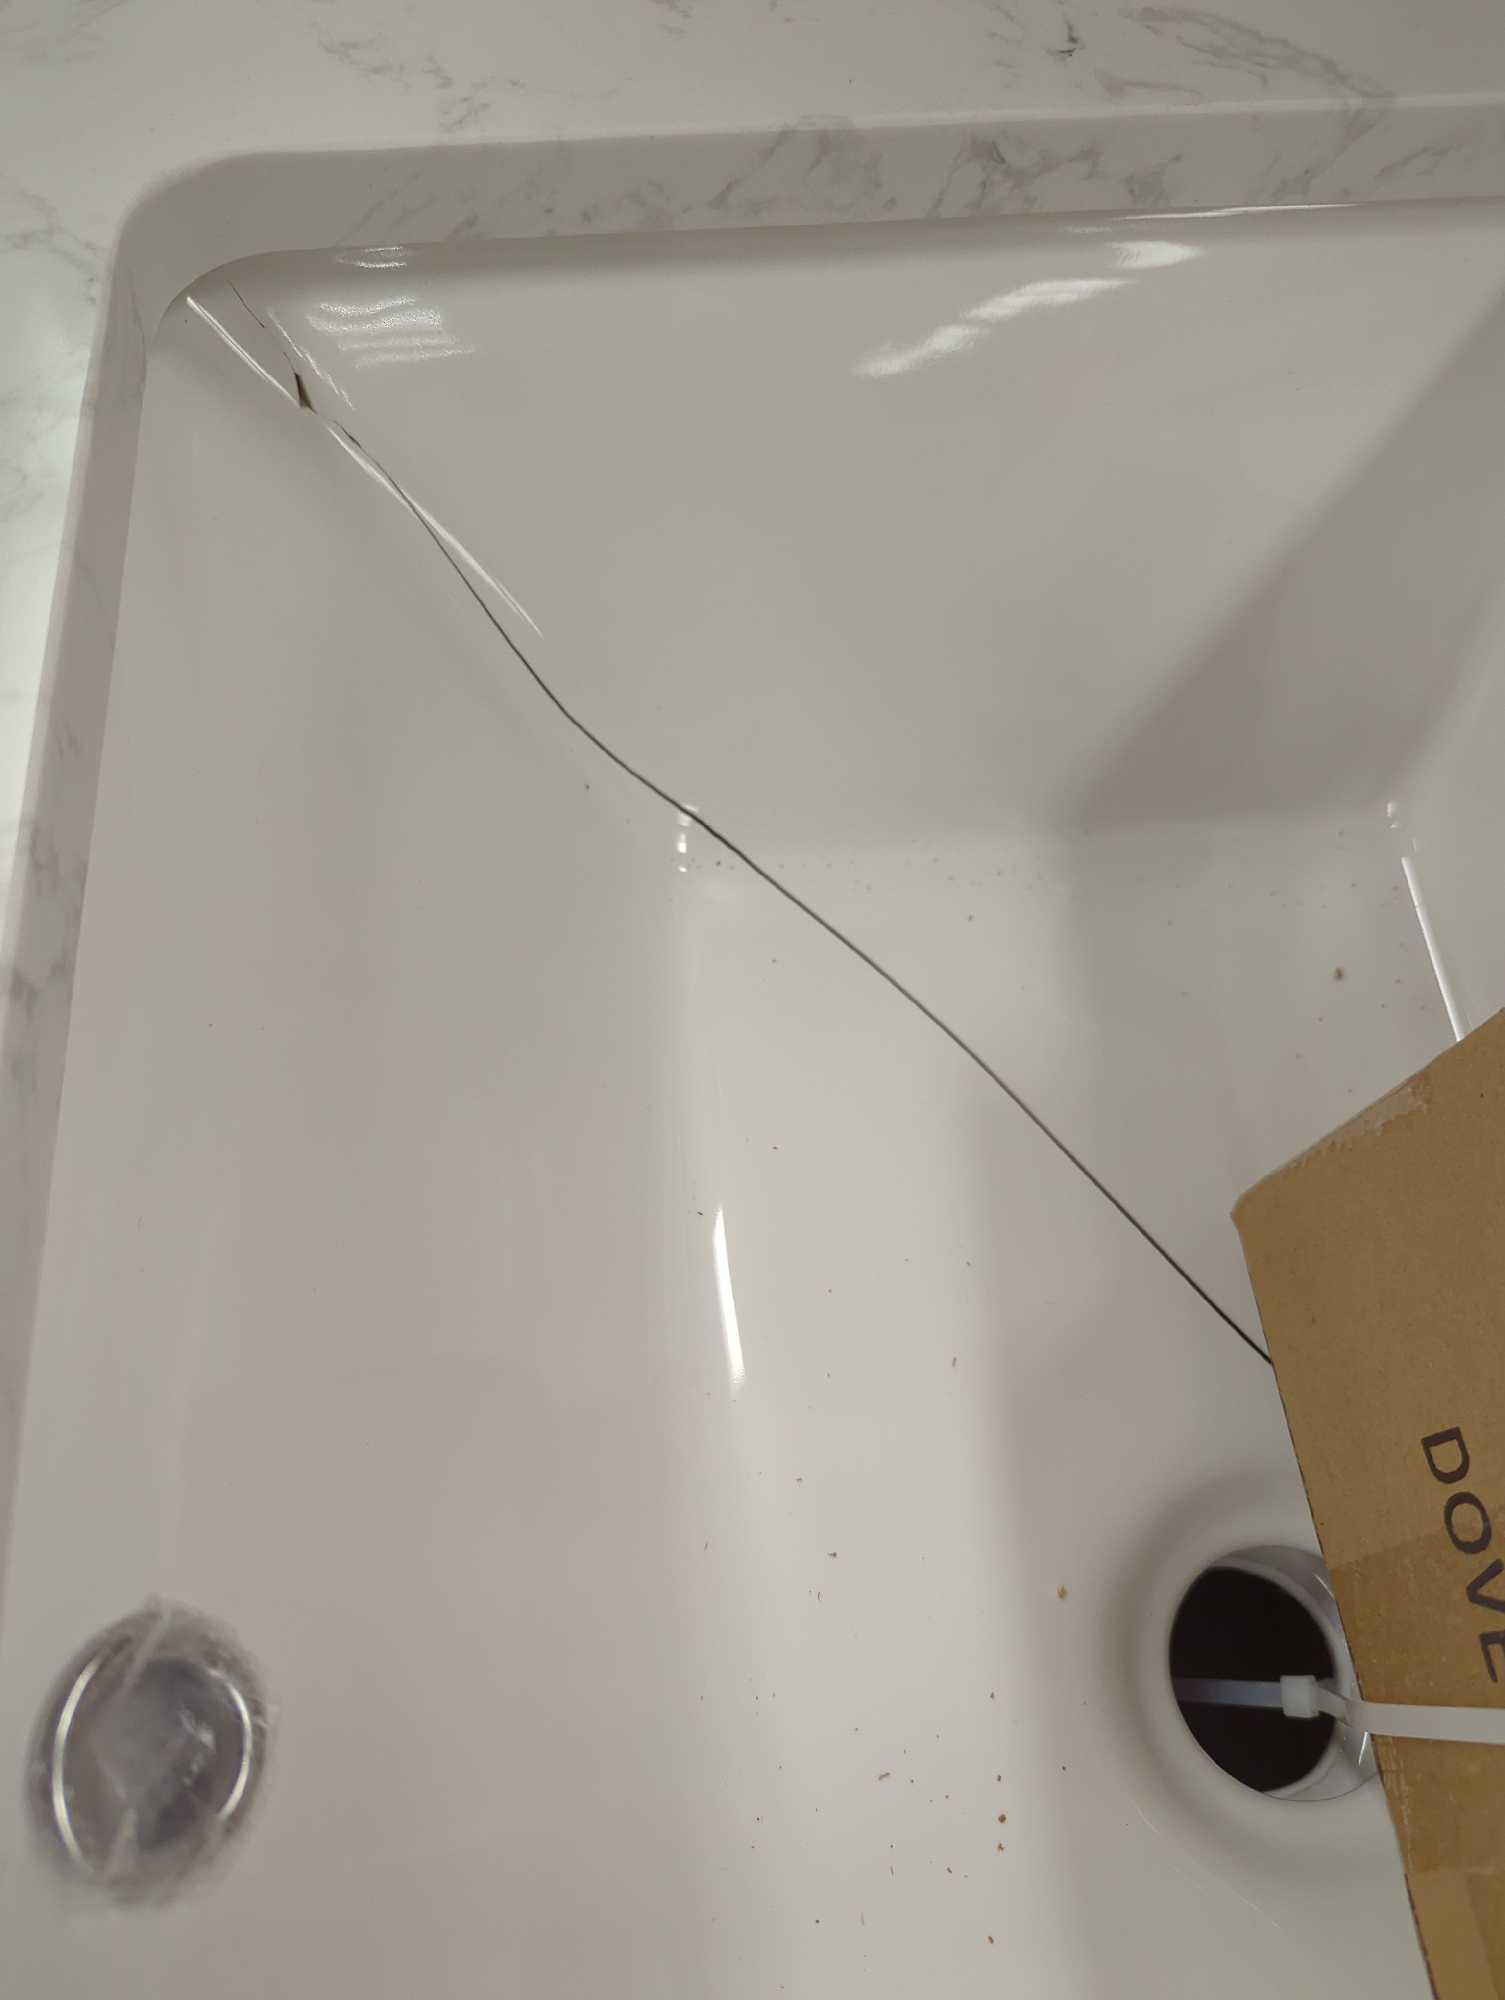 (Has A Crack In Sink and some Minor Damage on Back) Home Decorators Collection Doveton 30 in. Single